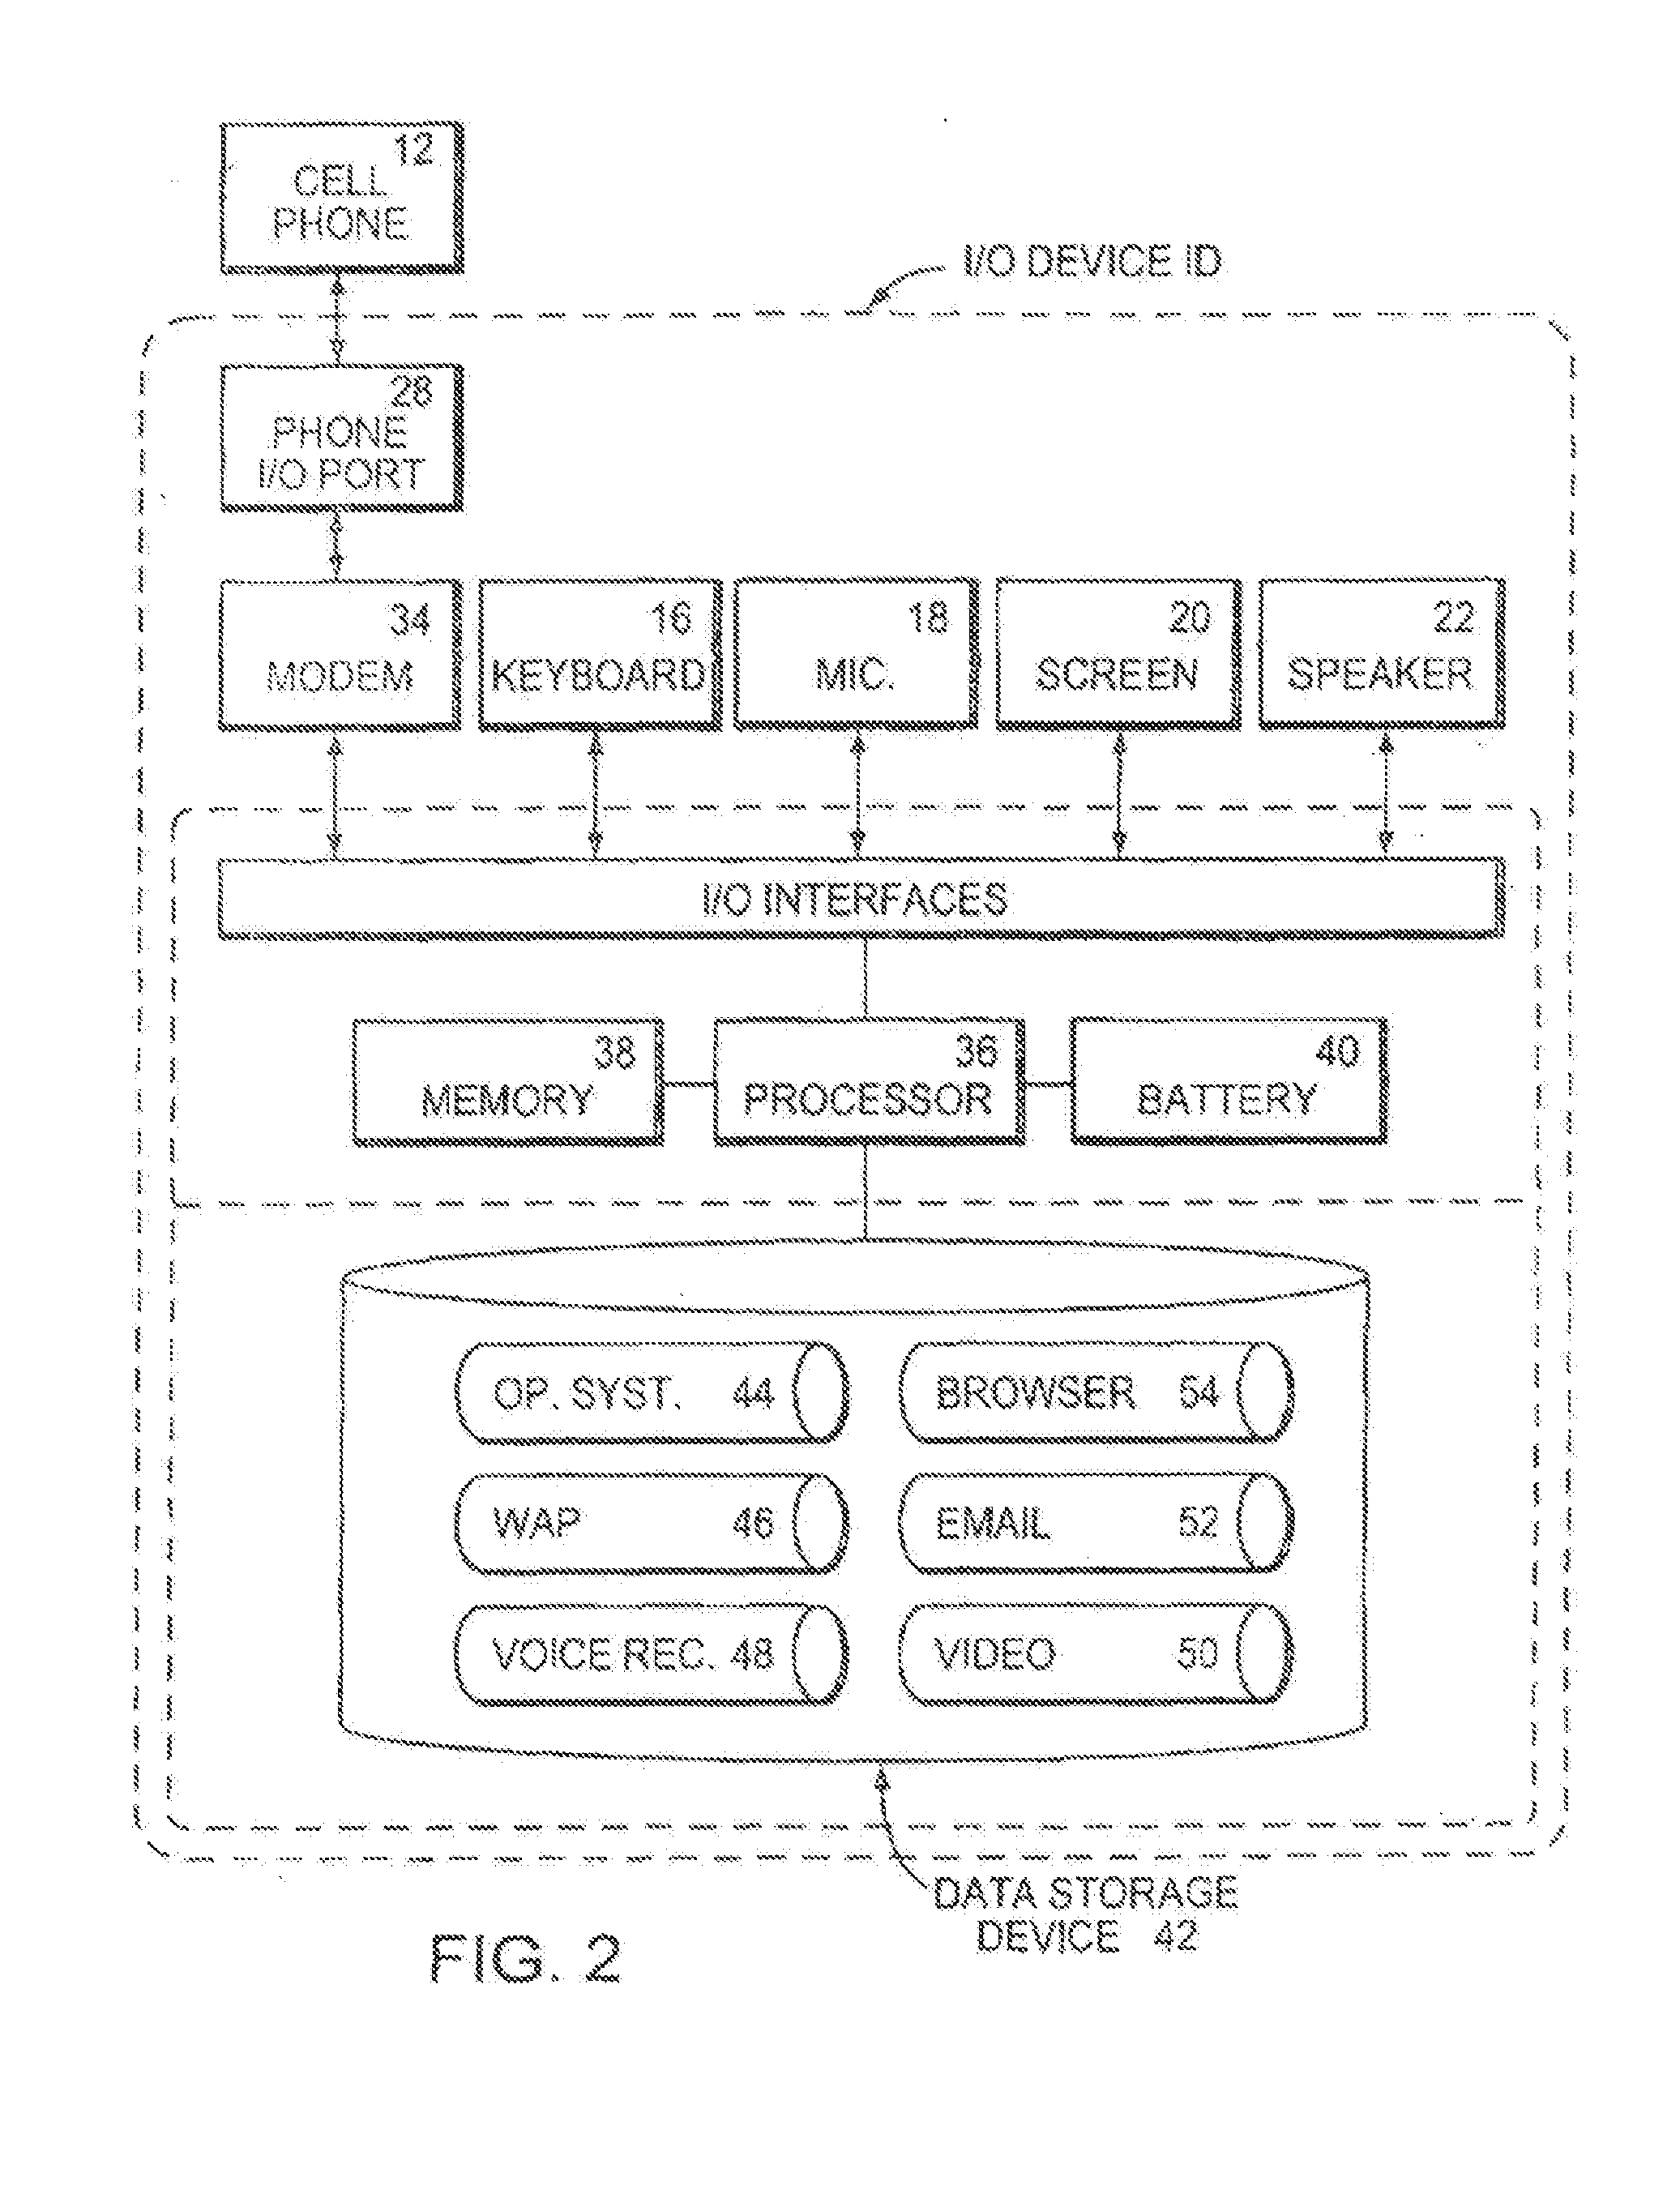 Expanded Display For Mobile Wireless Communication Device